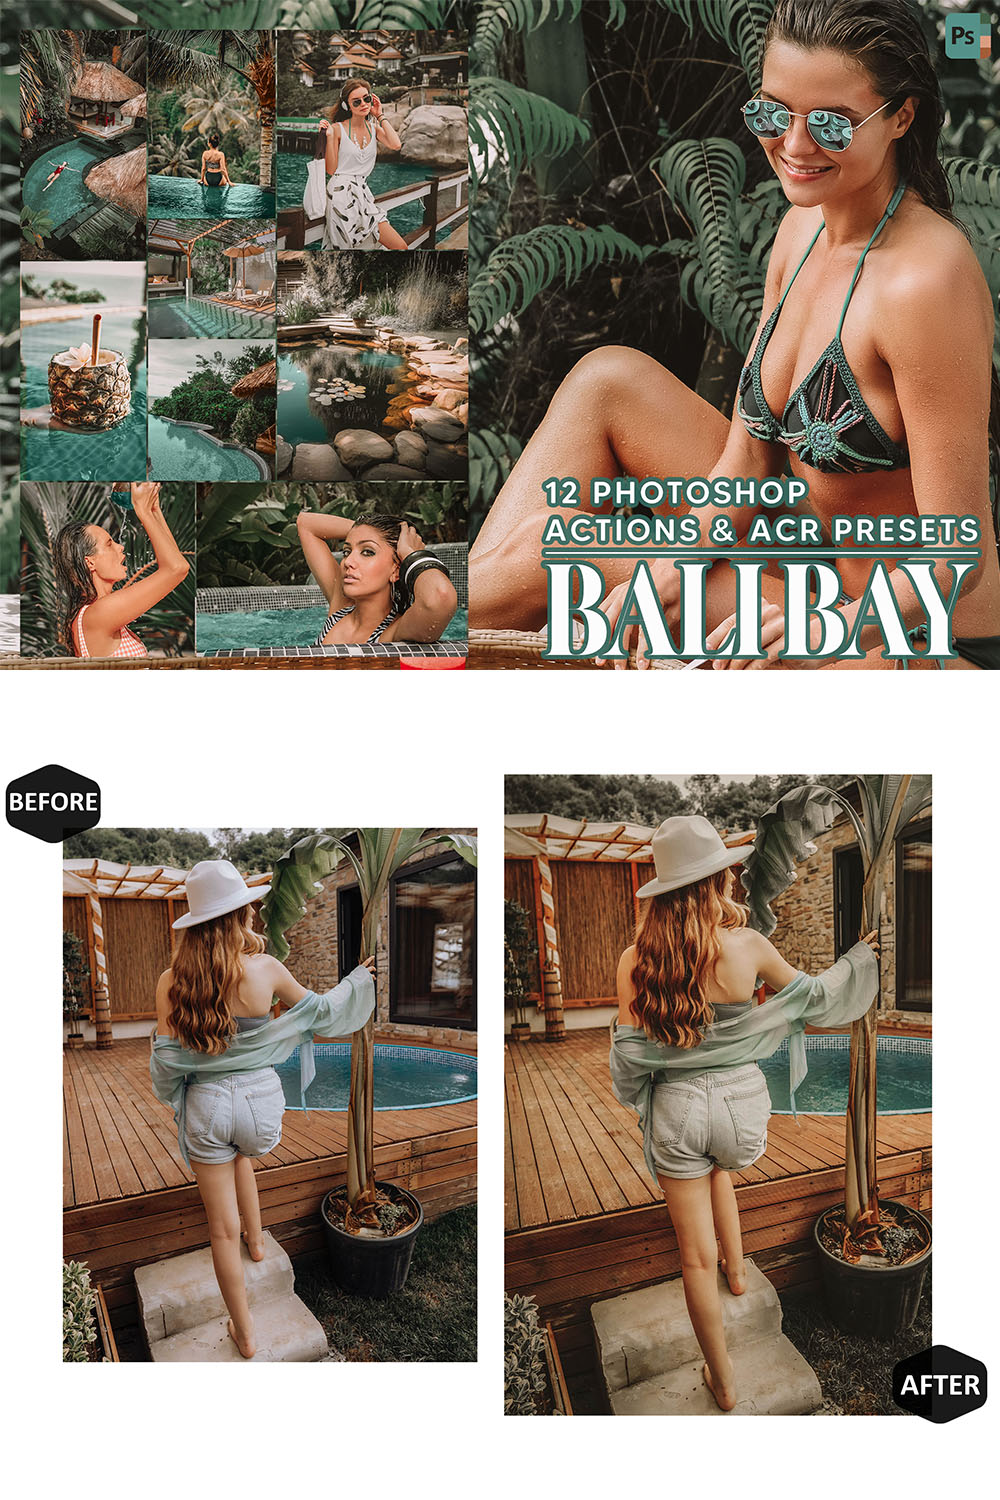 12 Photoshop Actions, Bali Bay Ps Action, Tropical ACR Preset, Travel Ps Filter, Atn Portrait And Lifestyle Theme For Instagram, Blogger pinterest preview image.